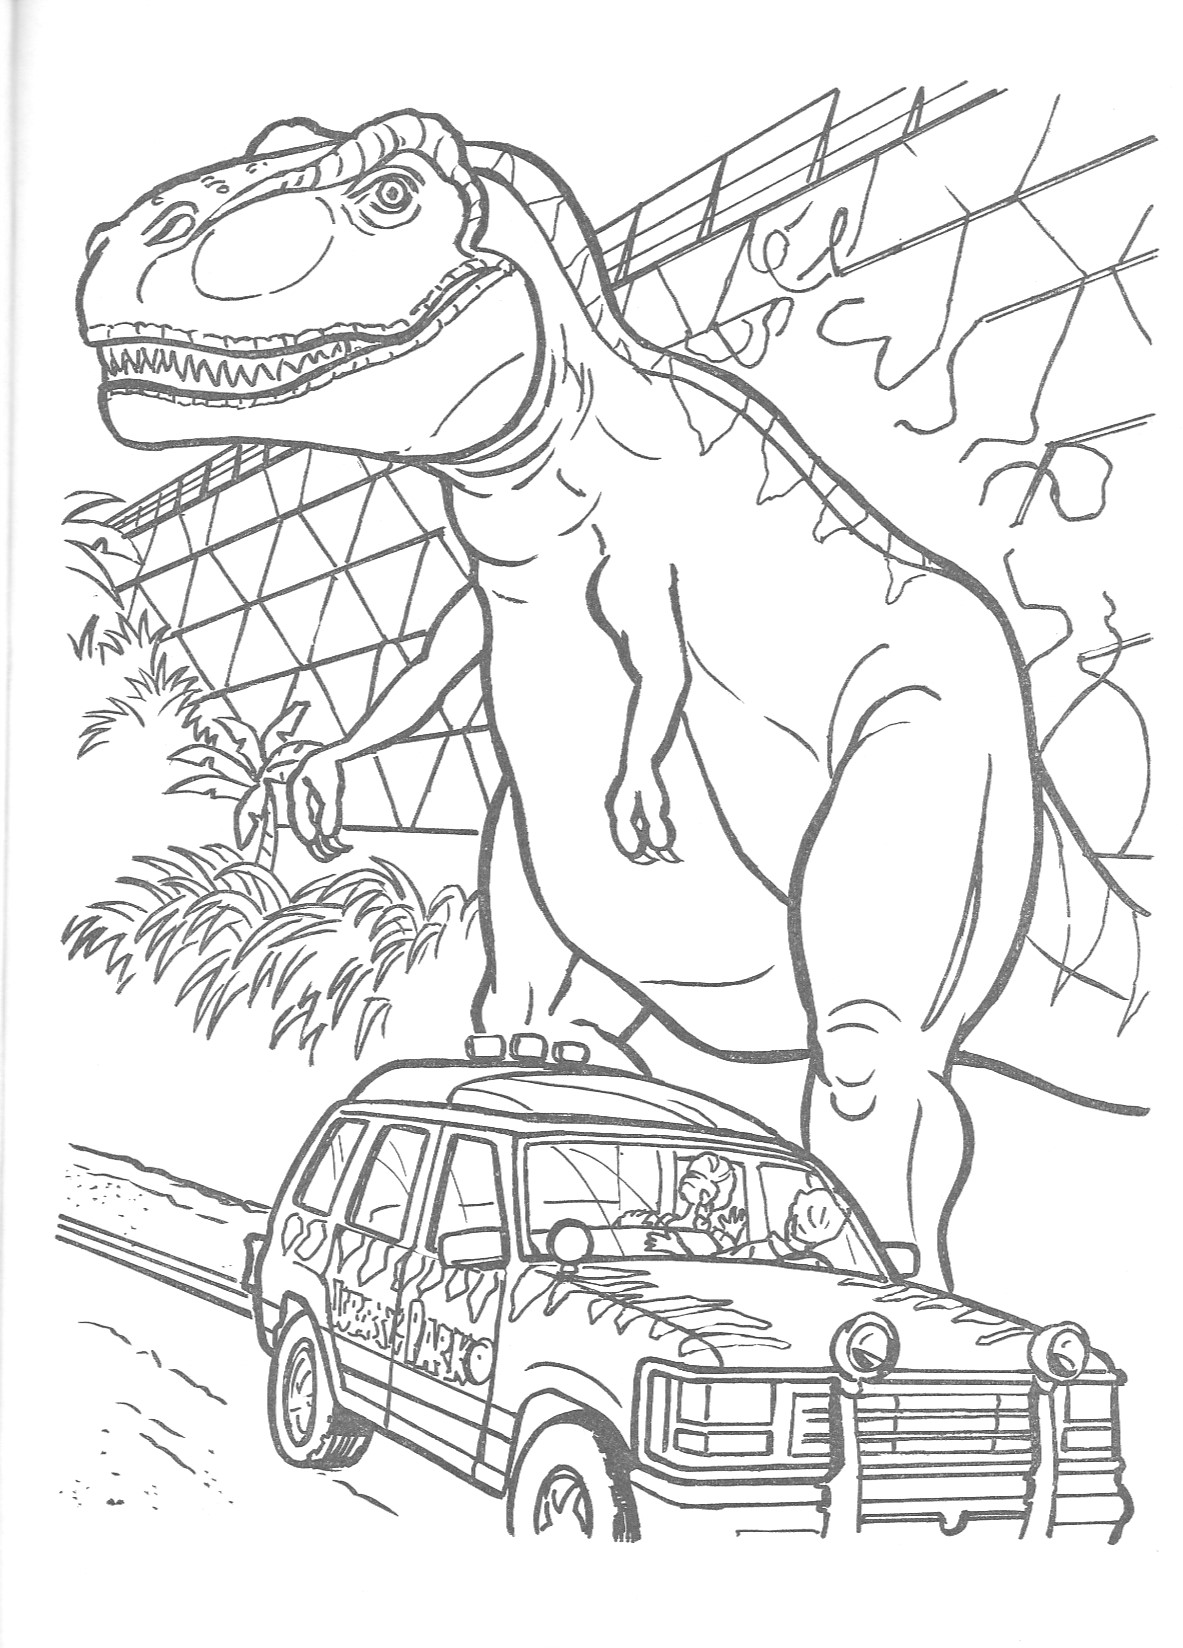 jurassic-park-official-coloring-page-jurassic-park-photo-43330815-fanpop